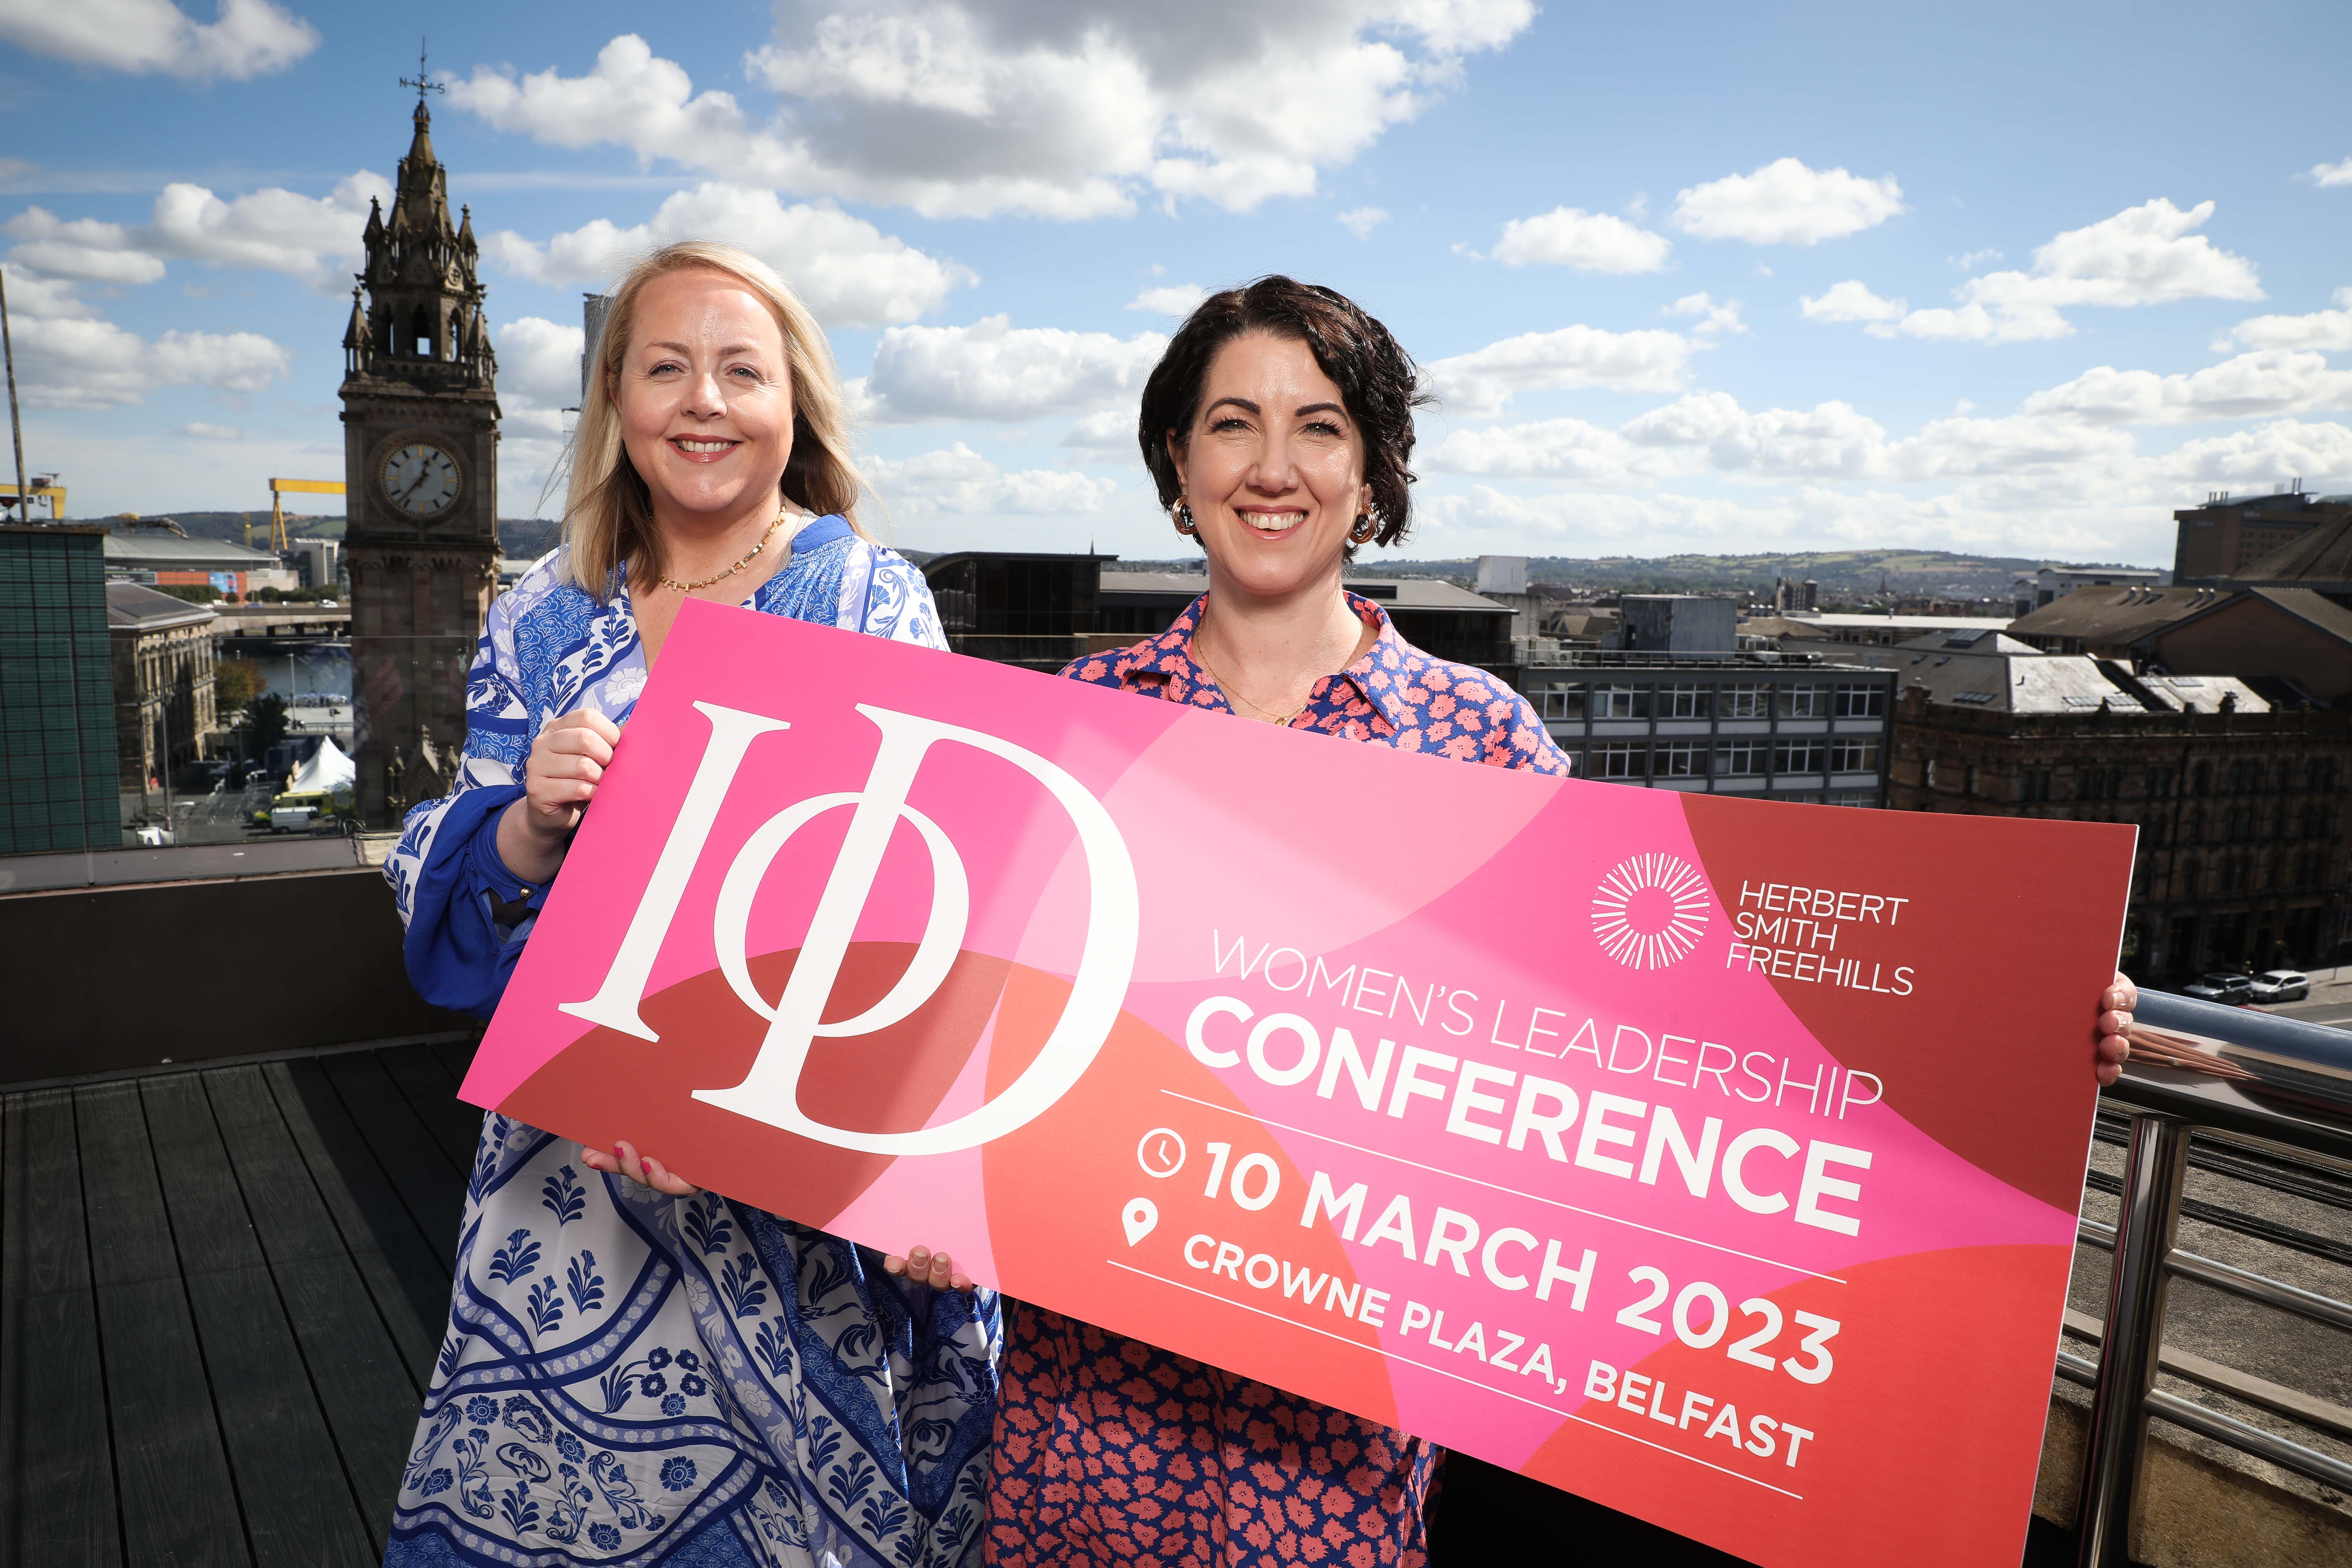 Women's Leadership Conference 10 Mar 2023 Business Events